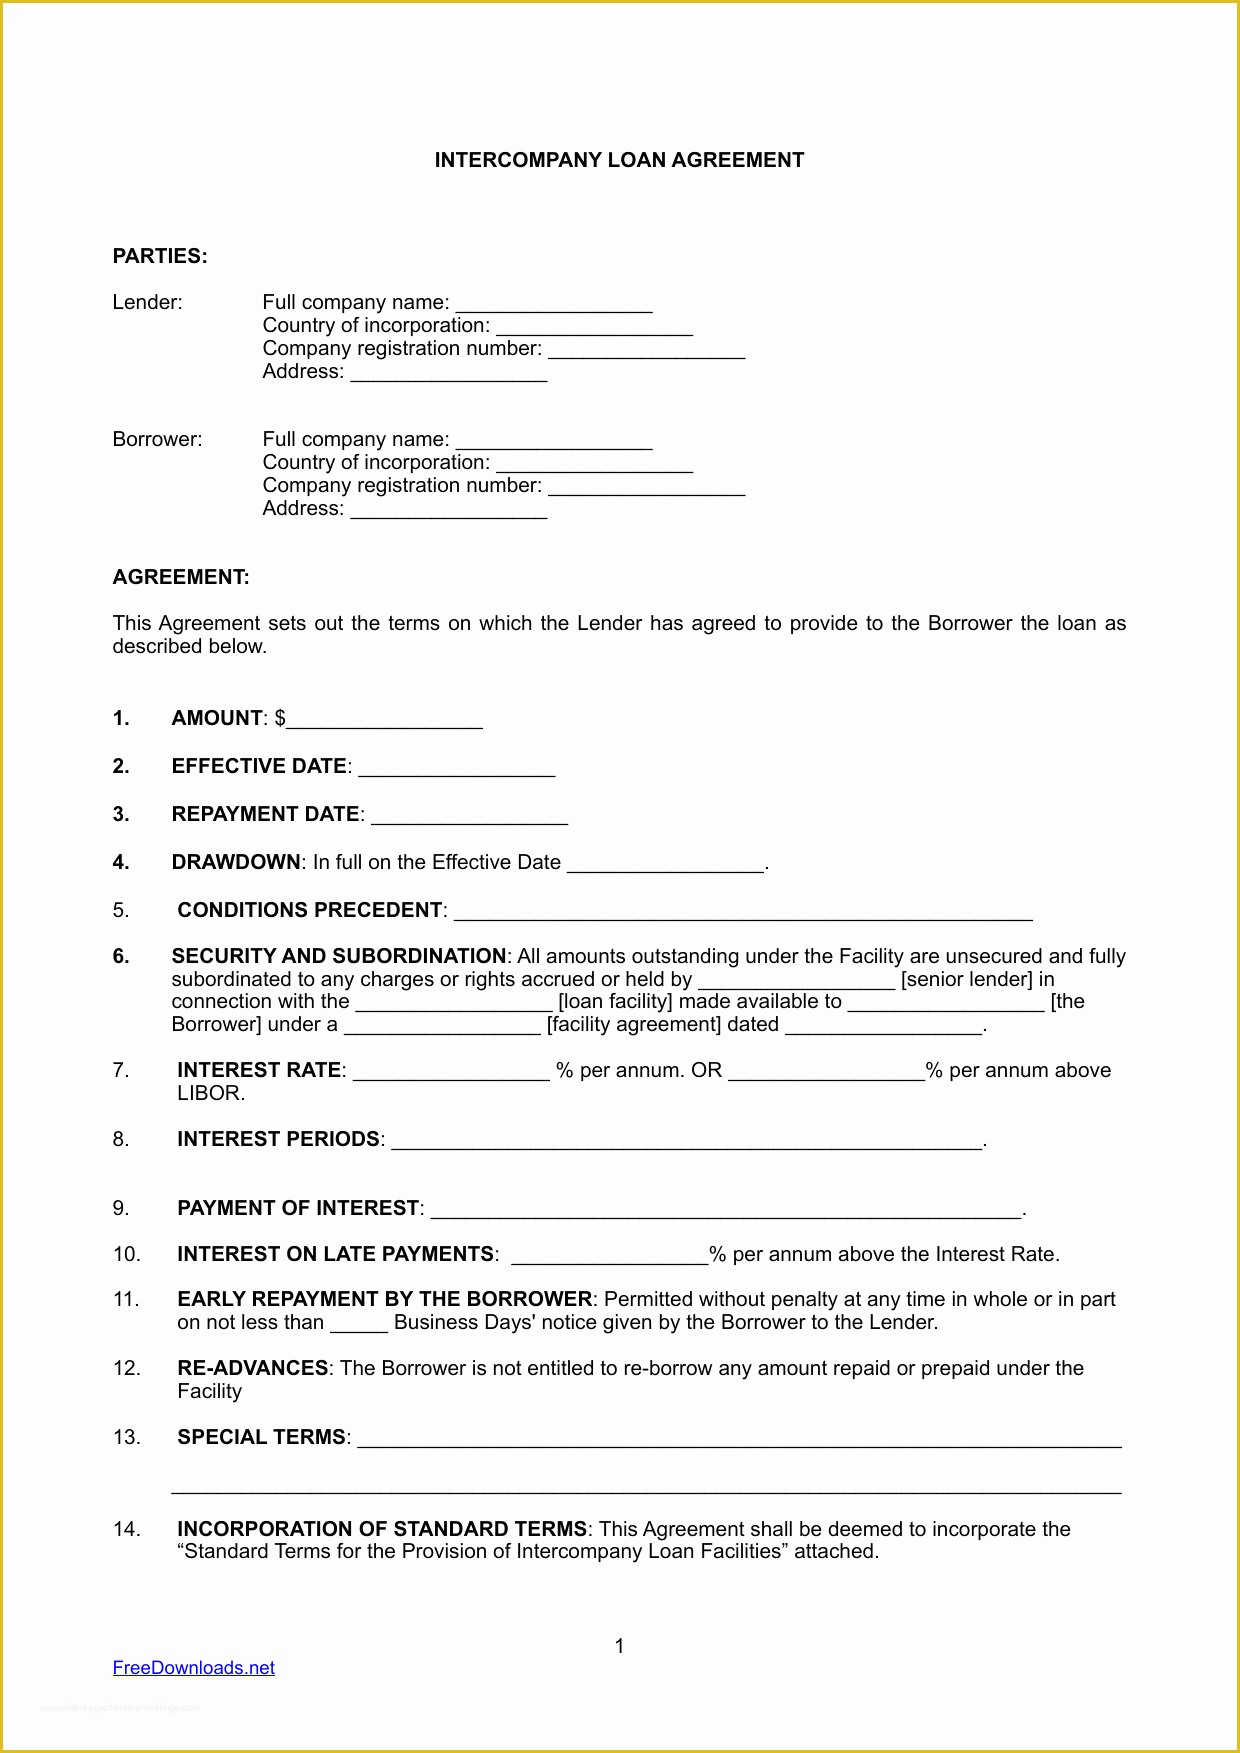 Free Loan Agreement Template Pdf Of Download Inter Pany Loan Agreement Template Pdf